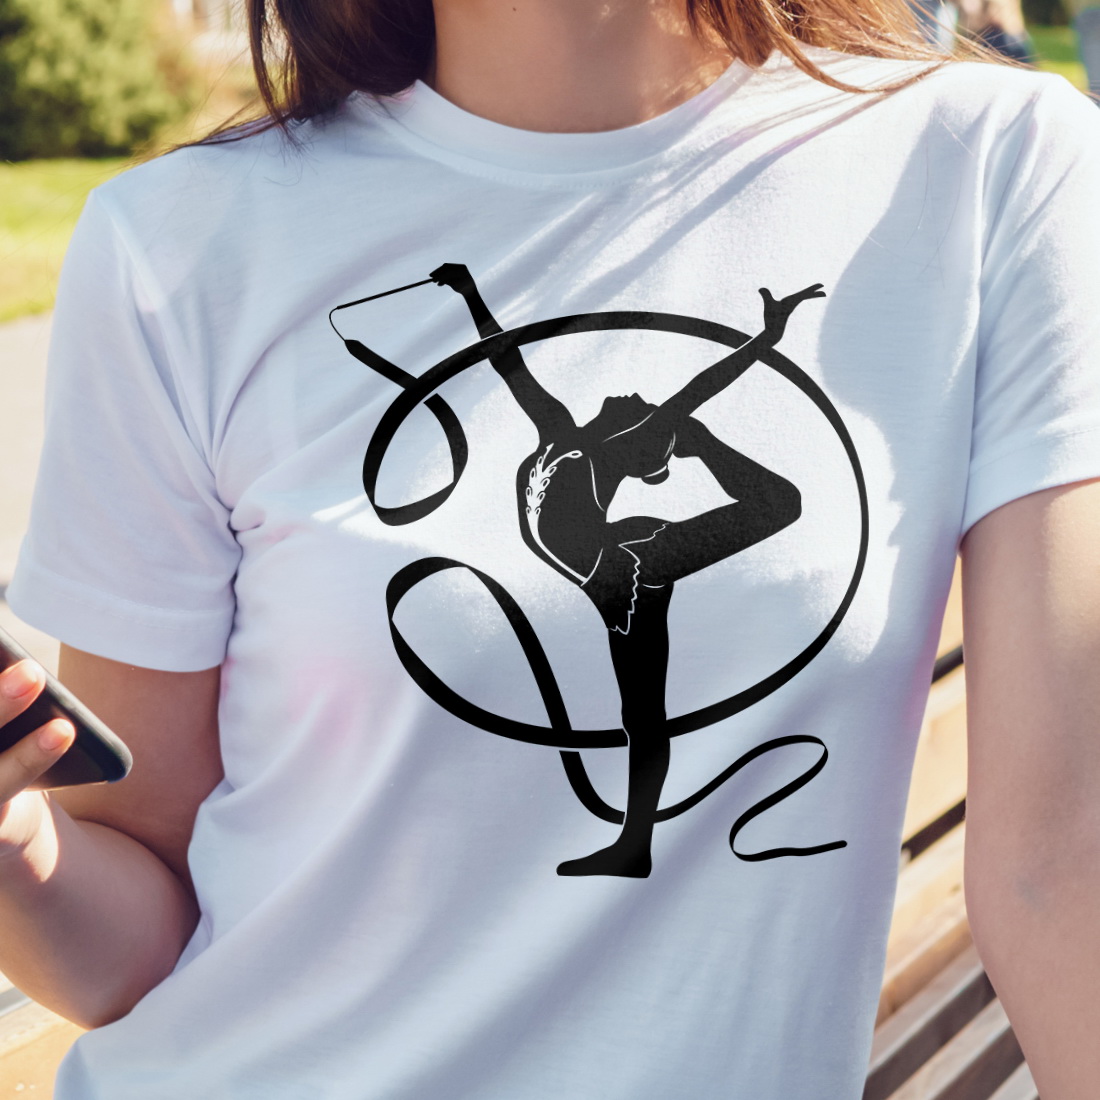 Simple t-shirt with a gymnast graphic.